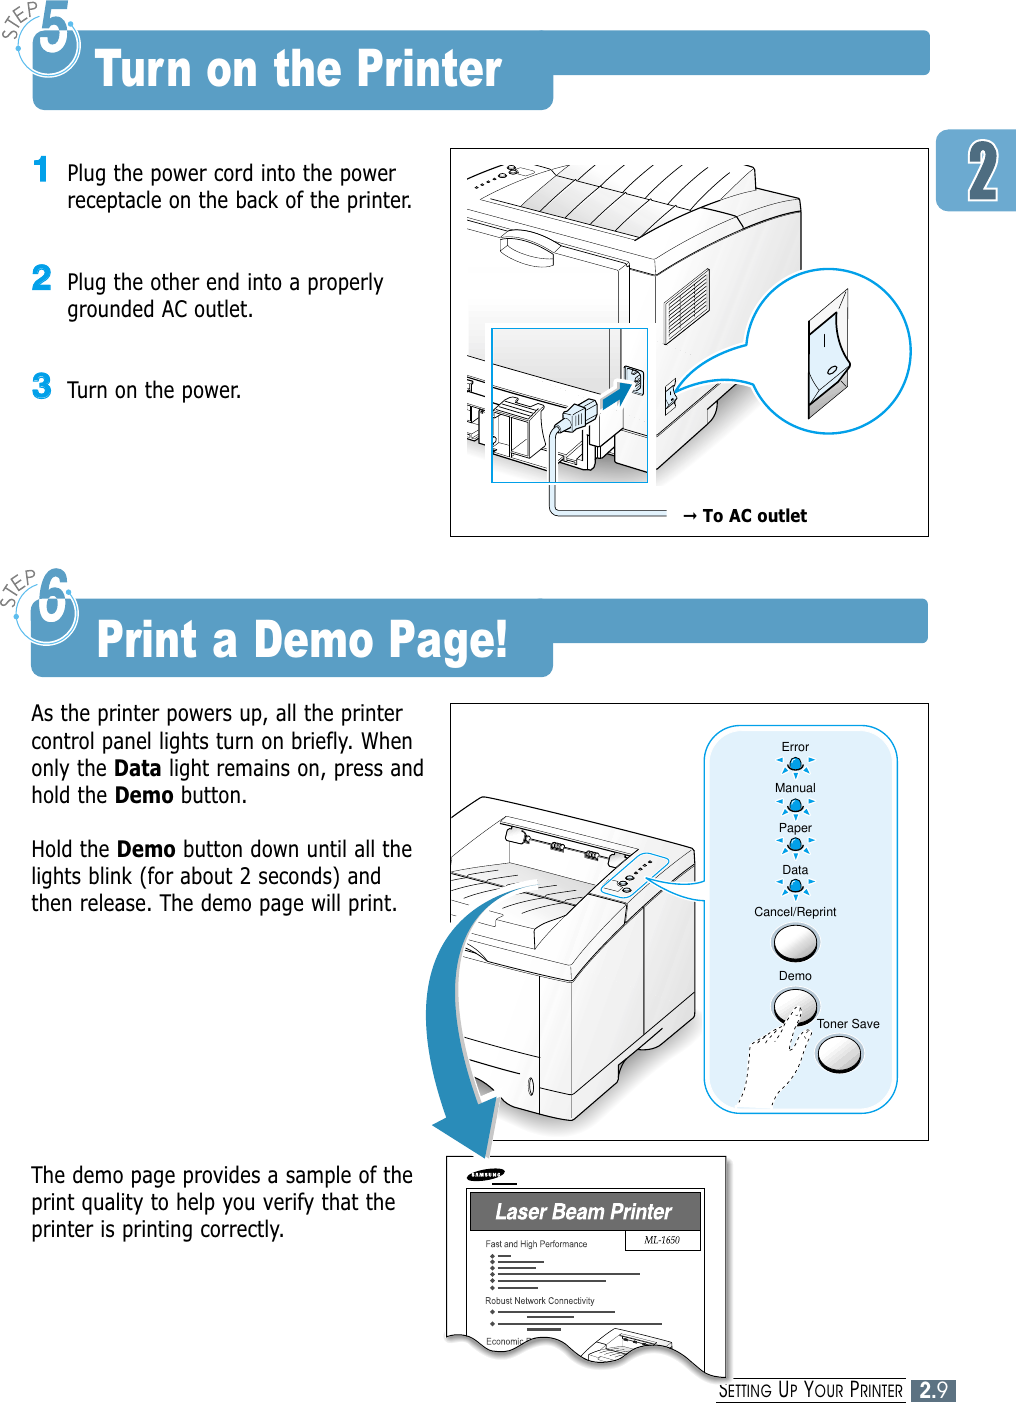 2.9SETTING UPYOUR PRINTER11Plug the power cord into the powerreceptacle on the back of the printer.22Plug the other end into a properlygrounded AC outlet.33Turn on the power.Turn on the PrinterErrorManualPaperDataCancel/ReprintDemoToner Save➞To AC outletAs the printer powers up, all the printercontrol panel lights turn on briefly. Whenonly the Data light remains on, press andhold the Demo button.Hold the Demo button down until all thelights blink (for about 2 seconds) andthen release. The demo page will print.The demo page provides a sample of theprint quality to help you verify that theprinter is printing correctly.Print a Demo Page!